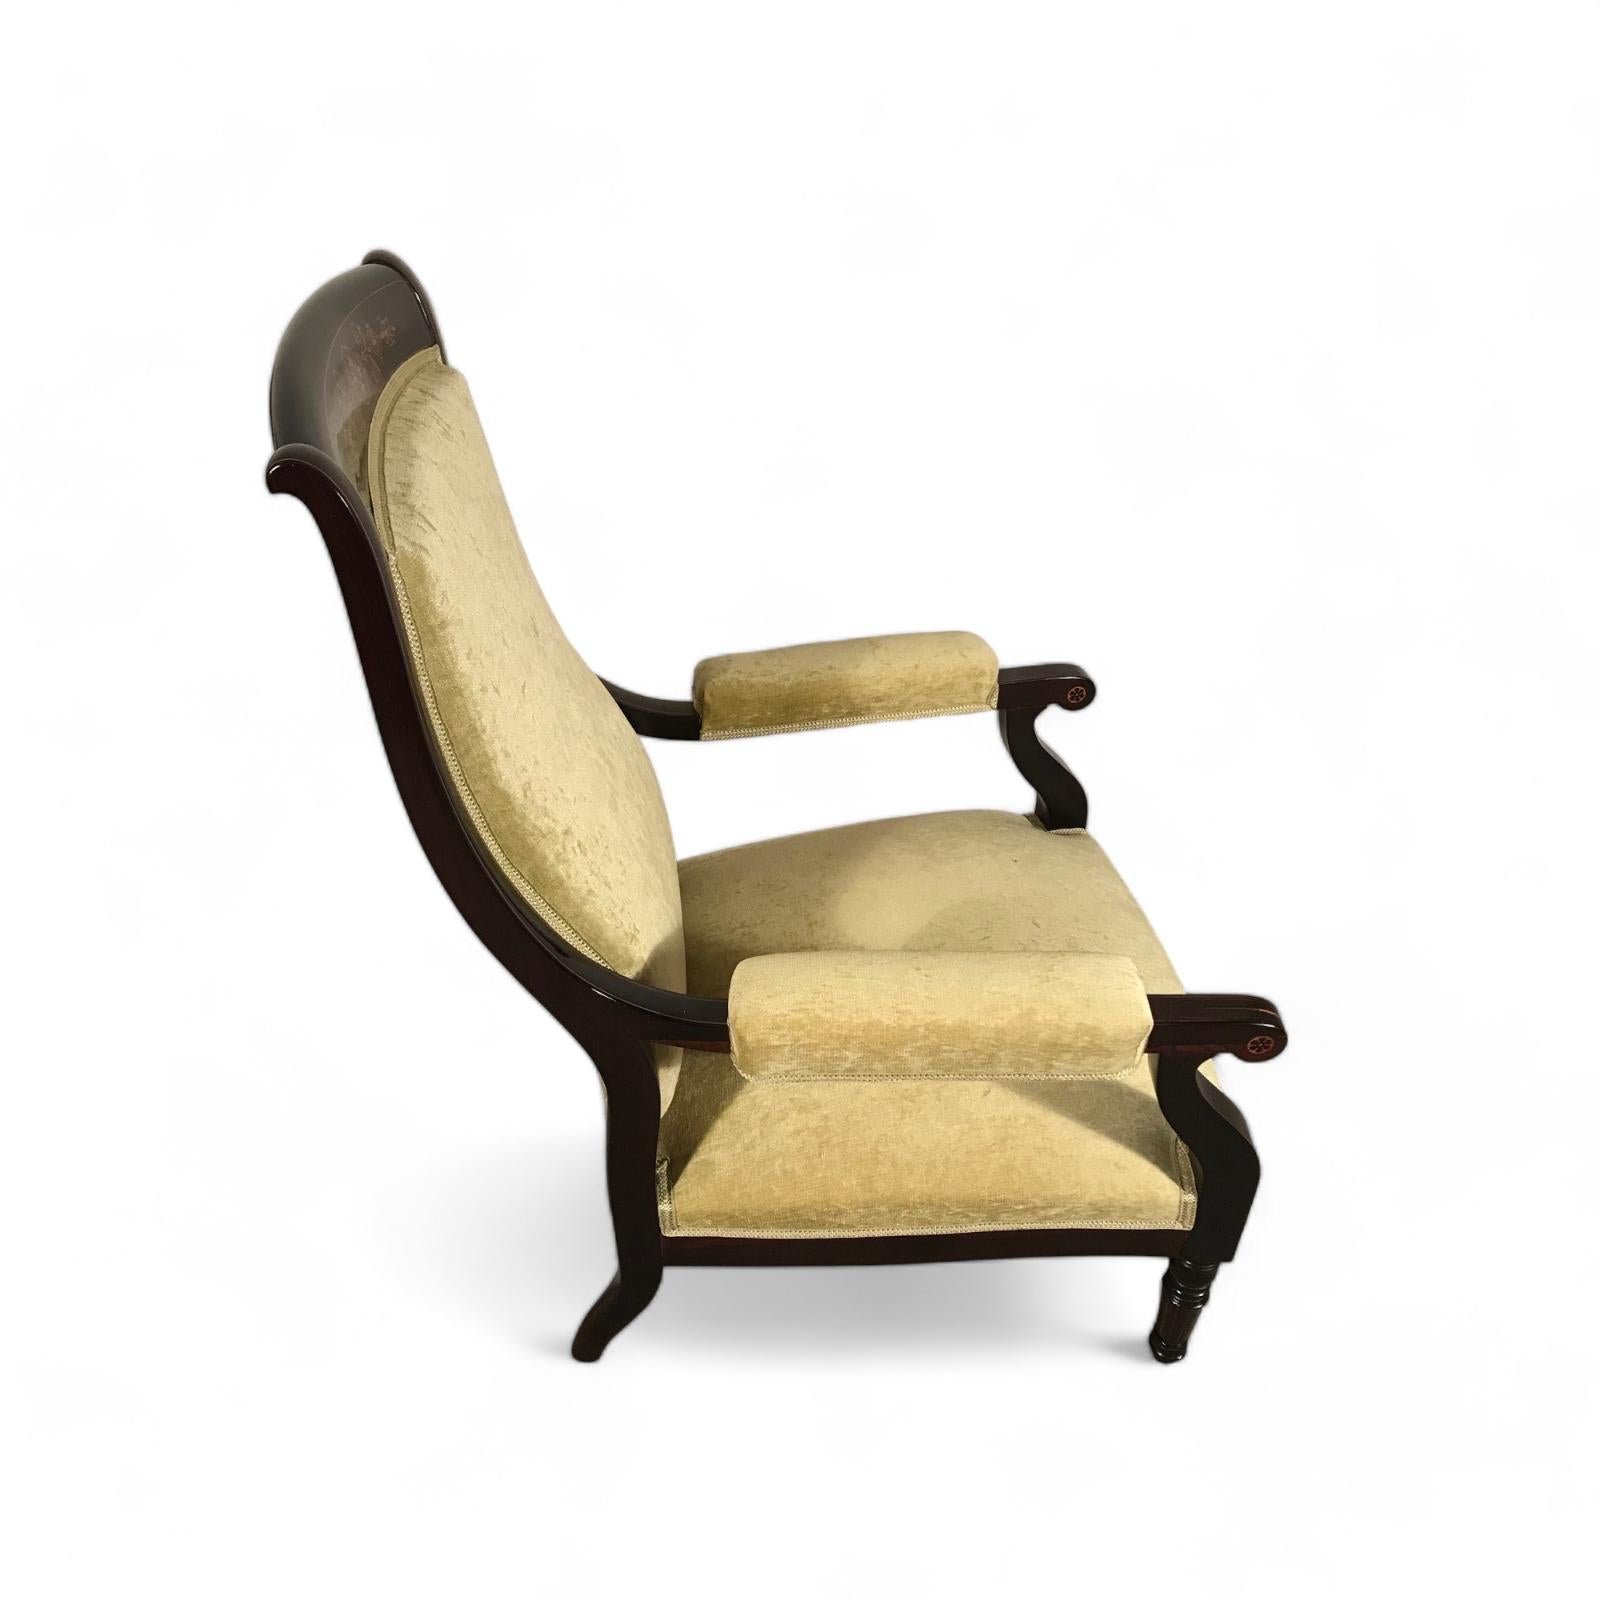 This low armchair dates back to around 1840 and comes from France. The chair was made during the French Restoration (Restauration) period.
There is an interesting explanation why low chairs were produced in the 19th century. The low-slung design of